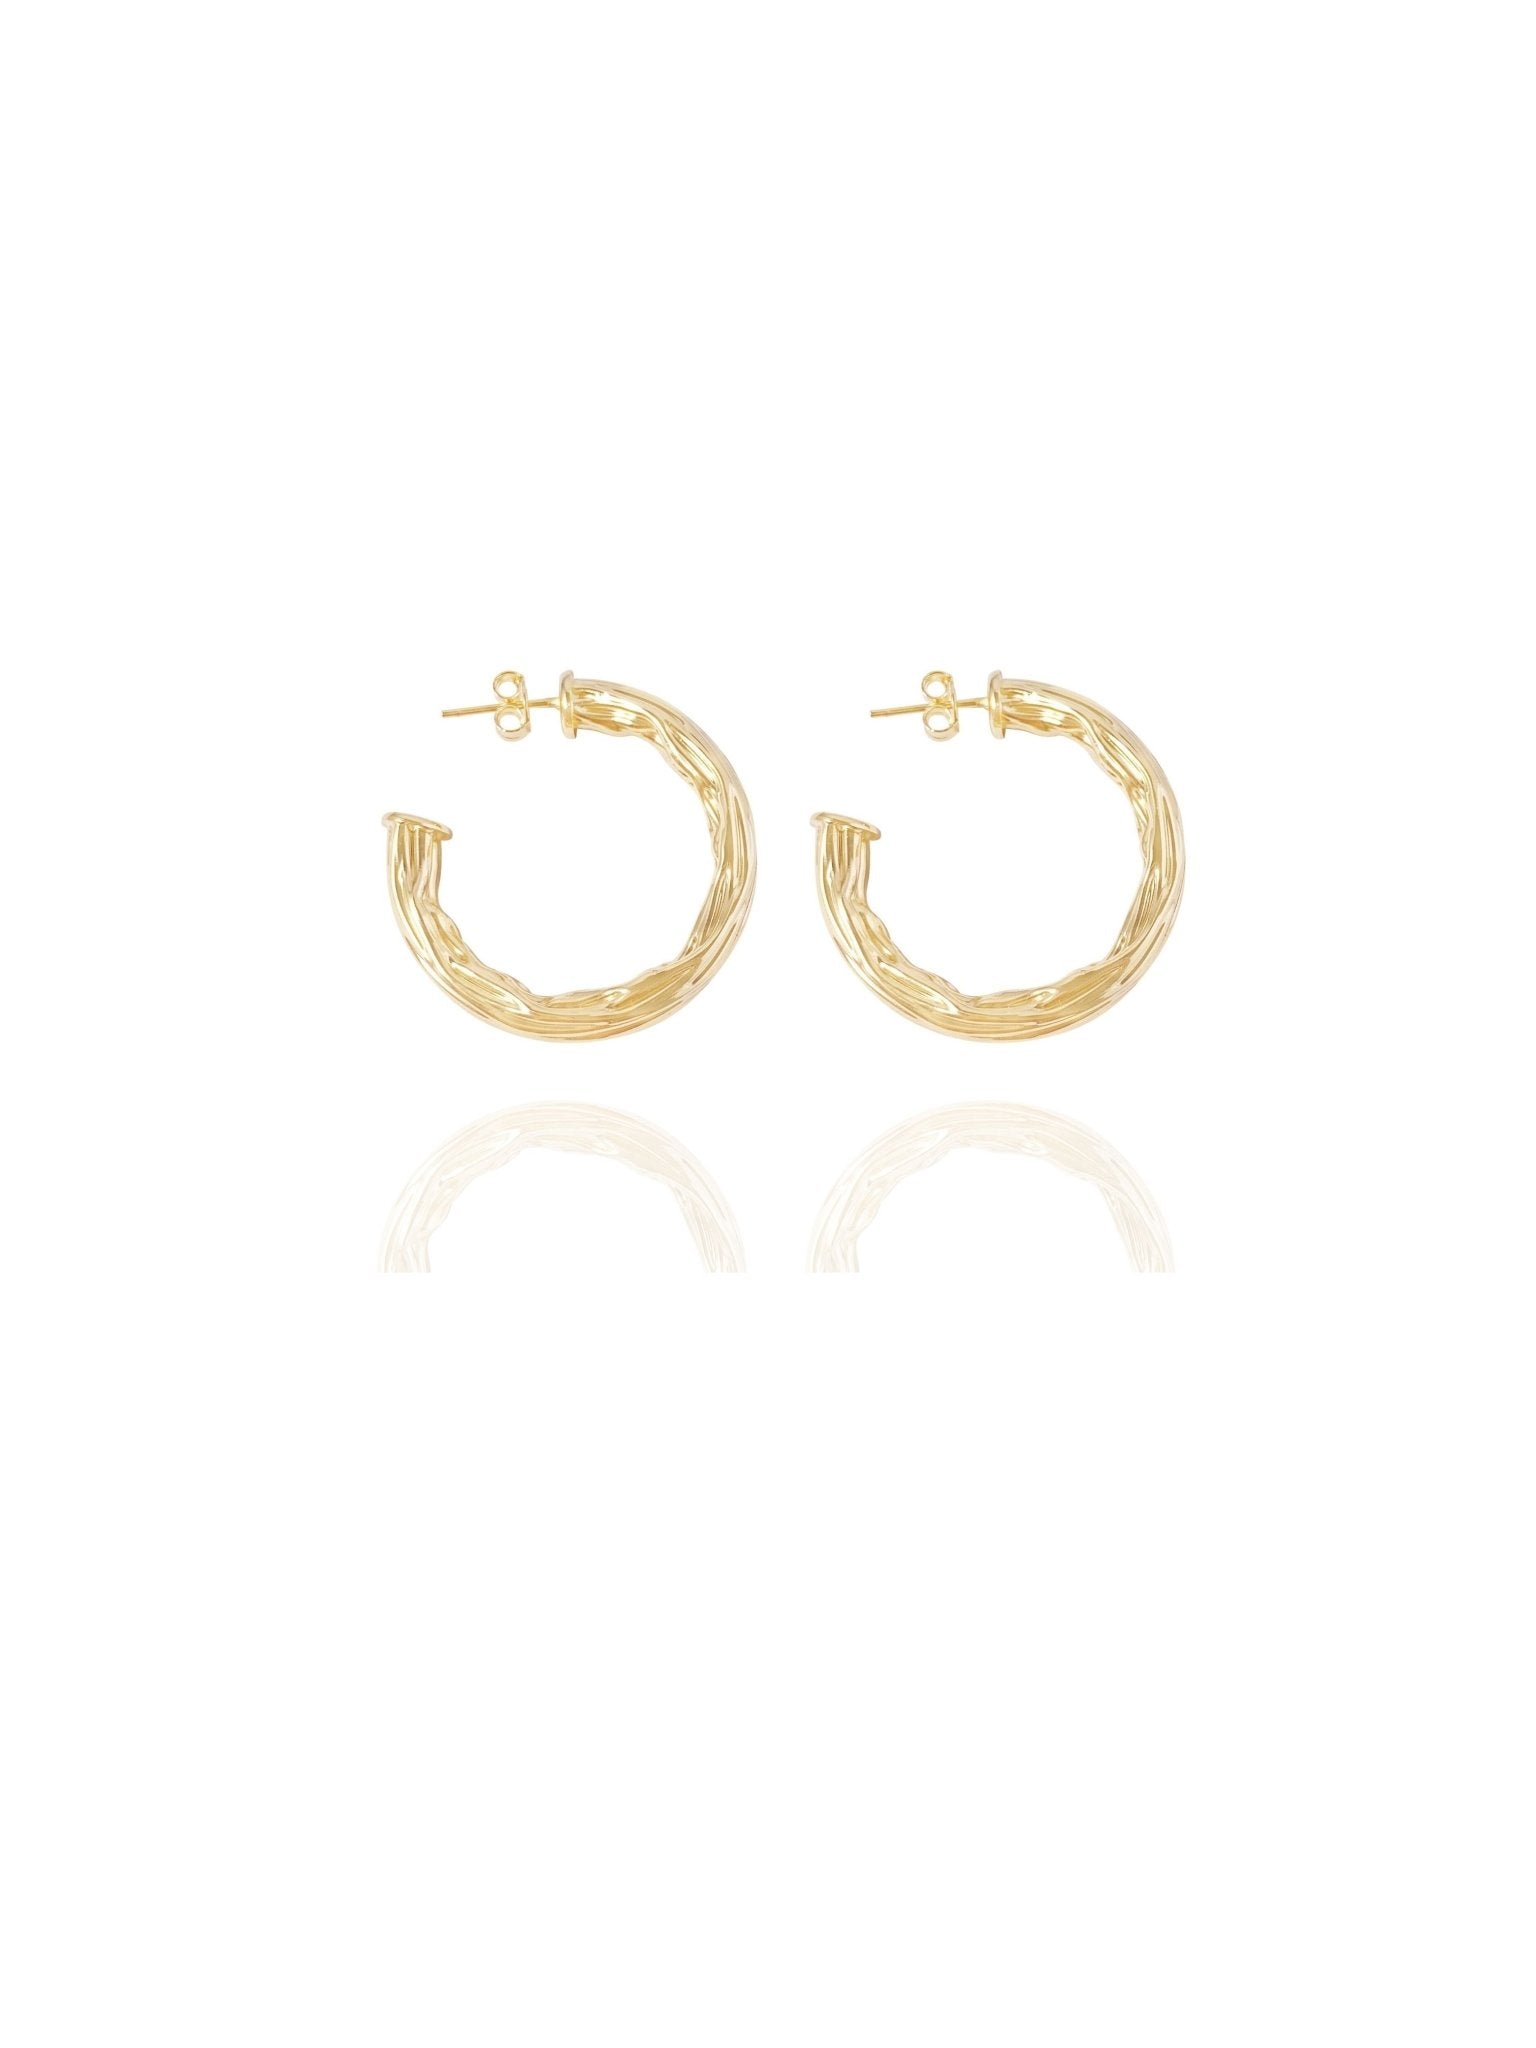 Hammered Gold hoops 1.4